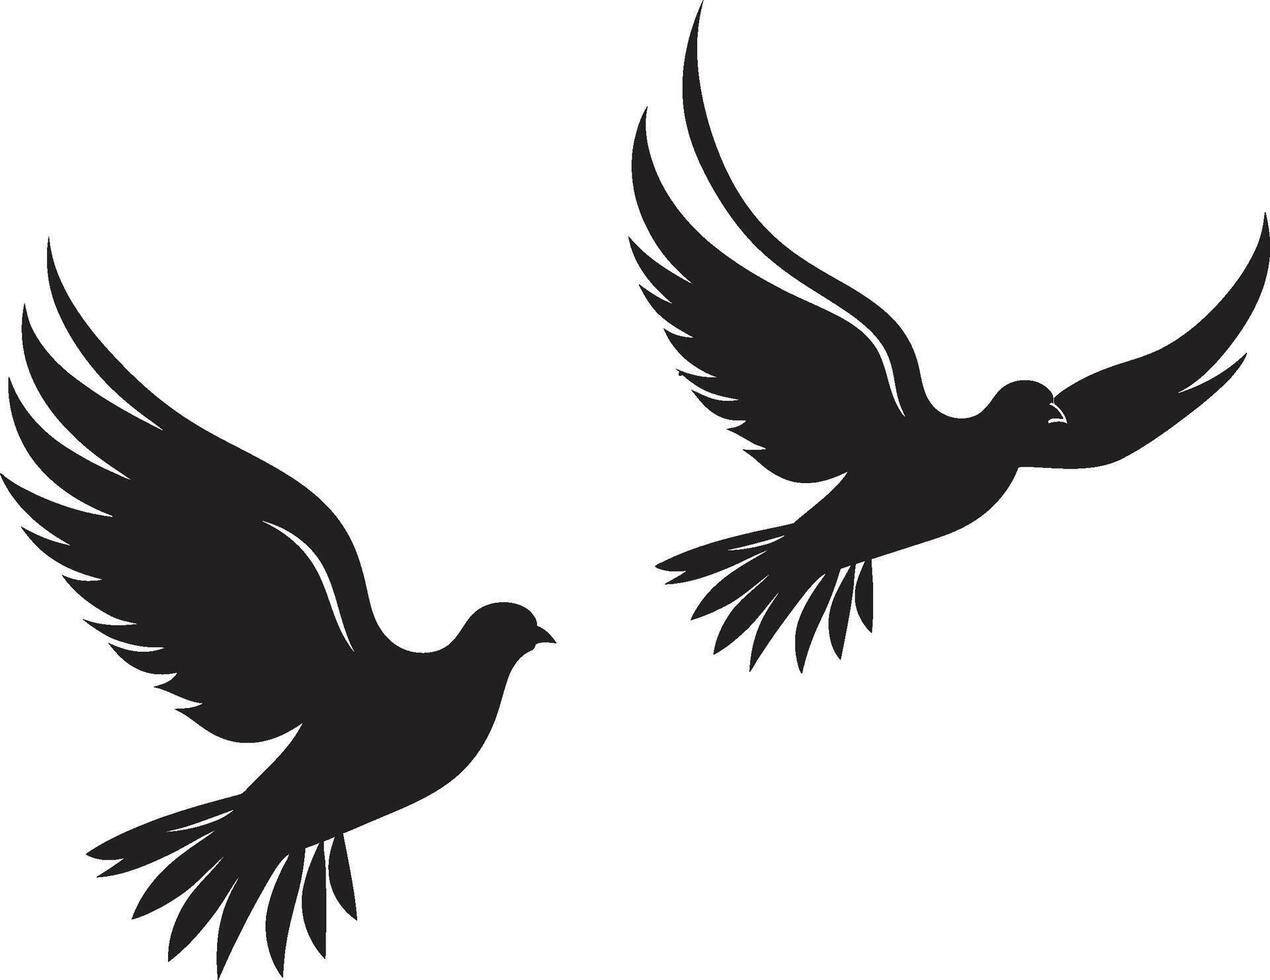 Celestial Connection of a Dove Pair Pair of Peace Dove Duo Element vector